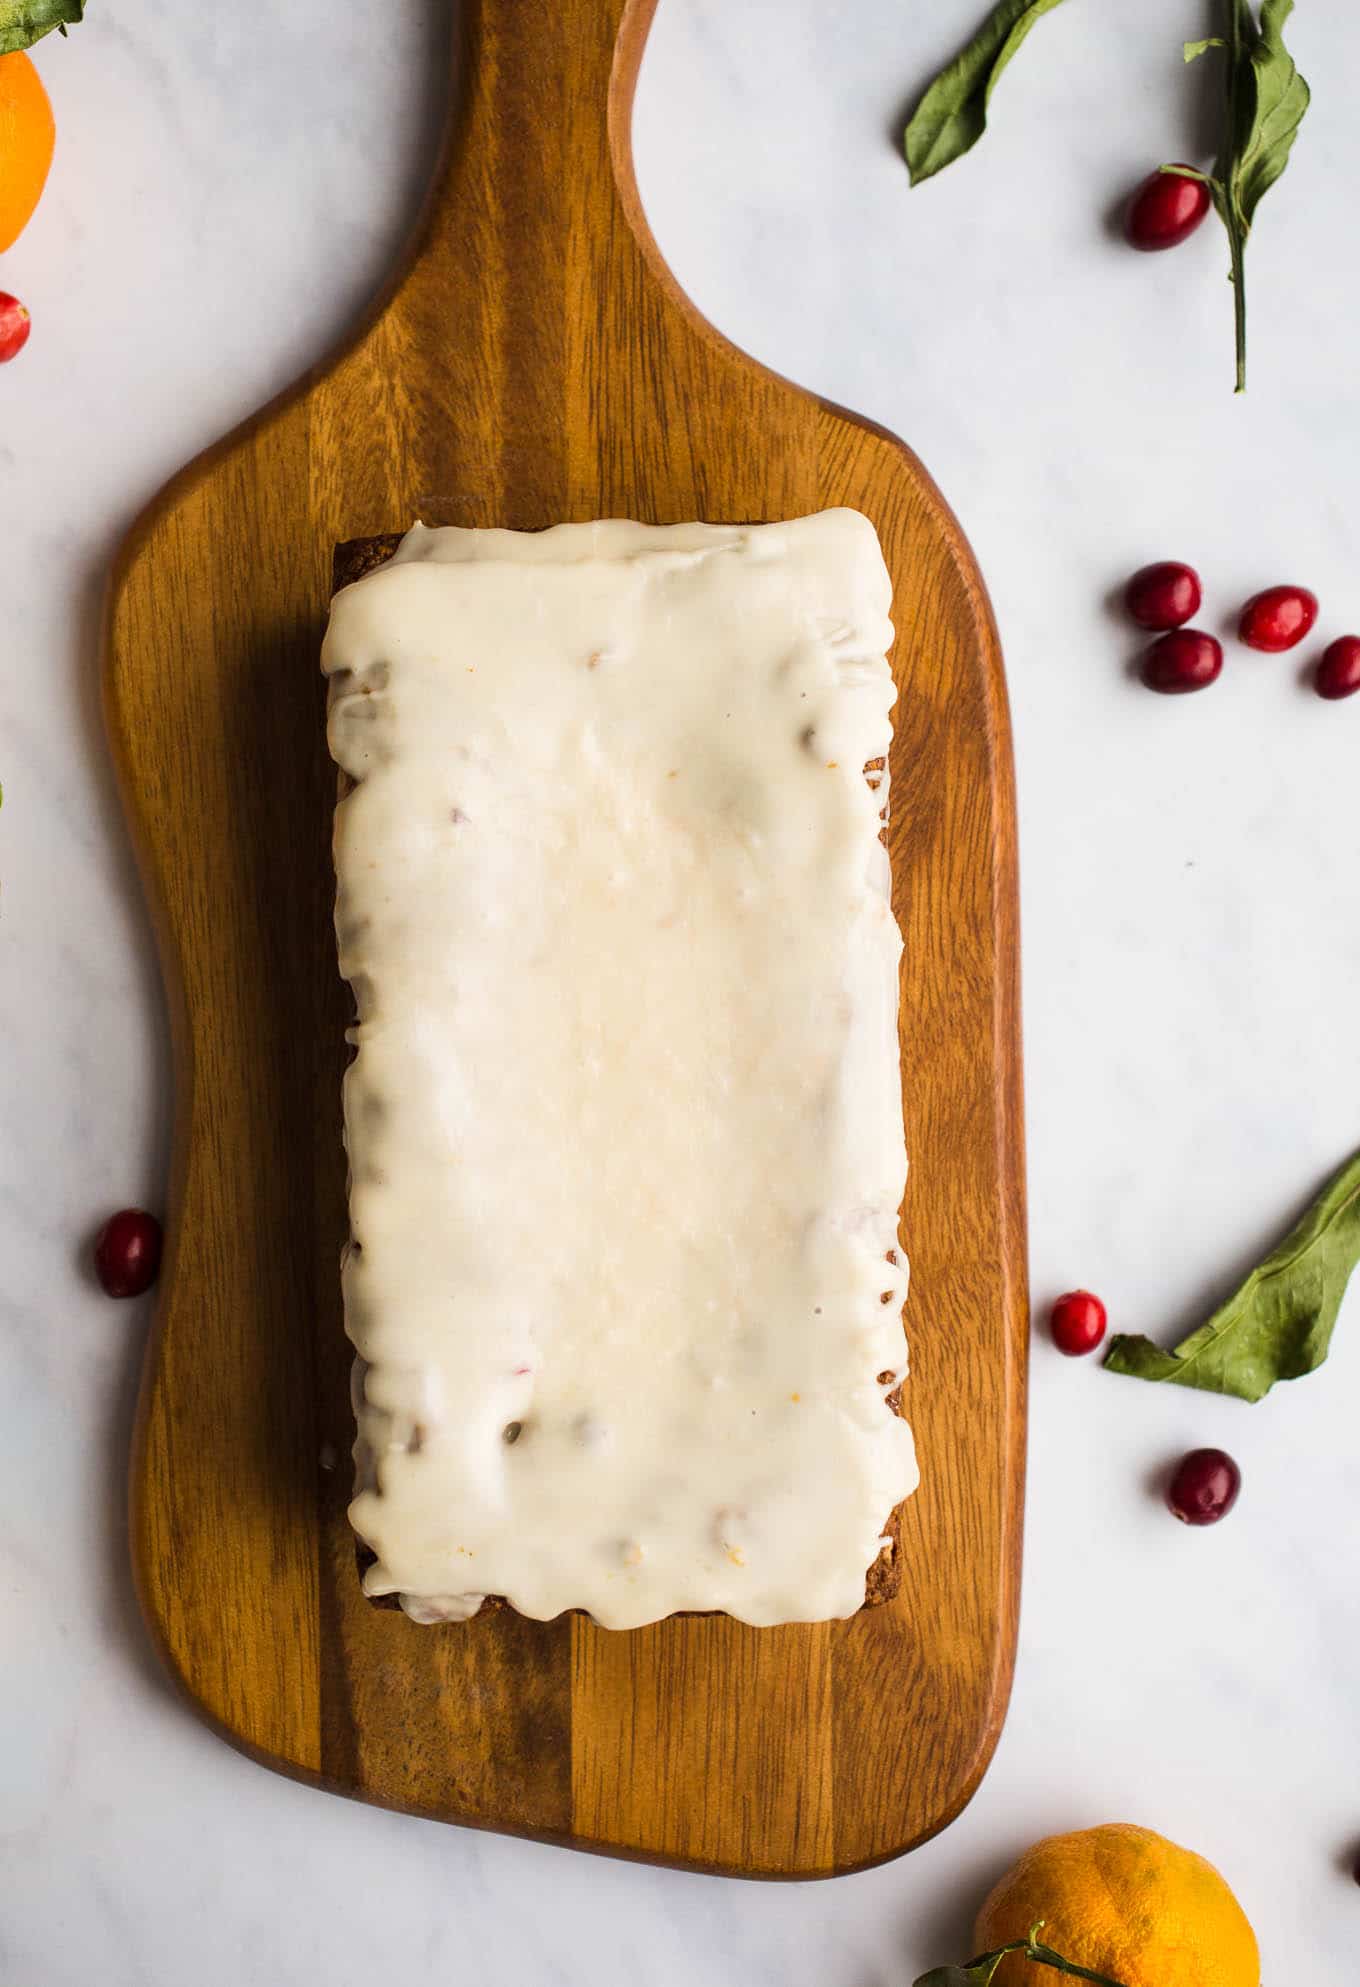 A healthier, moist, Gluten-Free Cranberry Orange Bread with an orange glaze made with almond and oat flours. Vegan. Have it for breakfast or dessert!